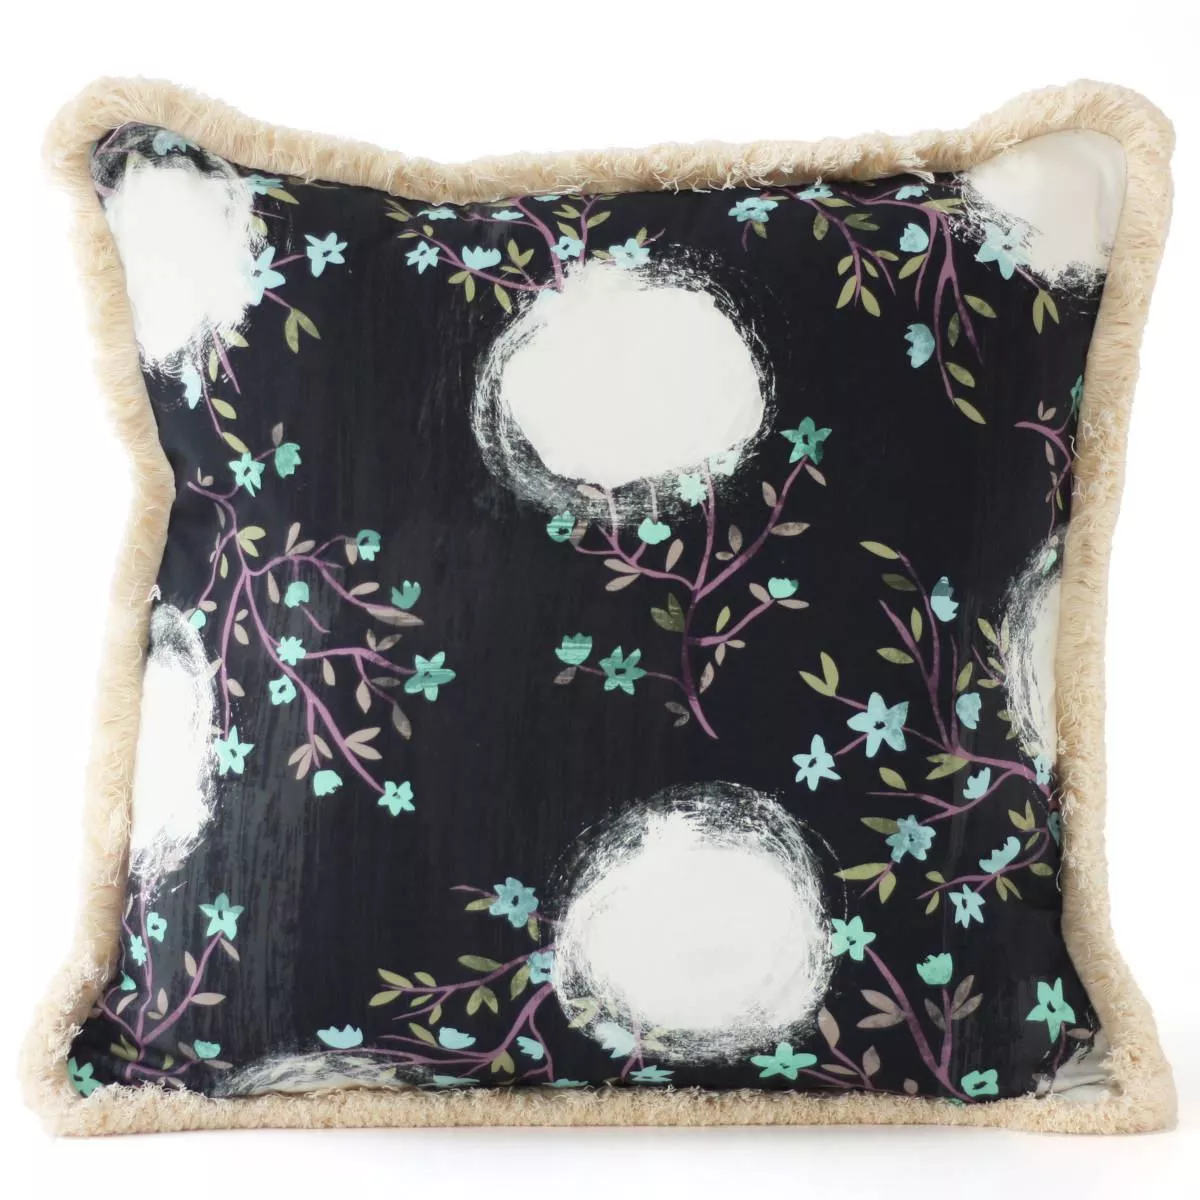 Large Sofa Cushion with Flower Motif as Print on Cotton (55 x 55 cm)